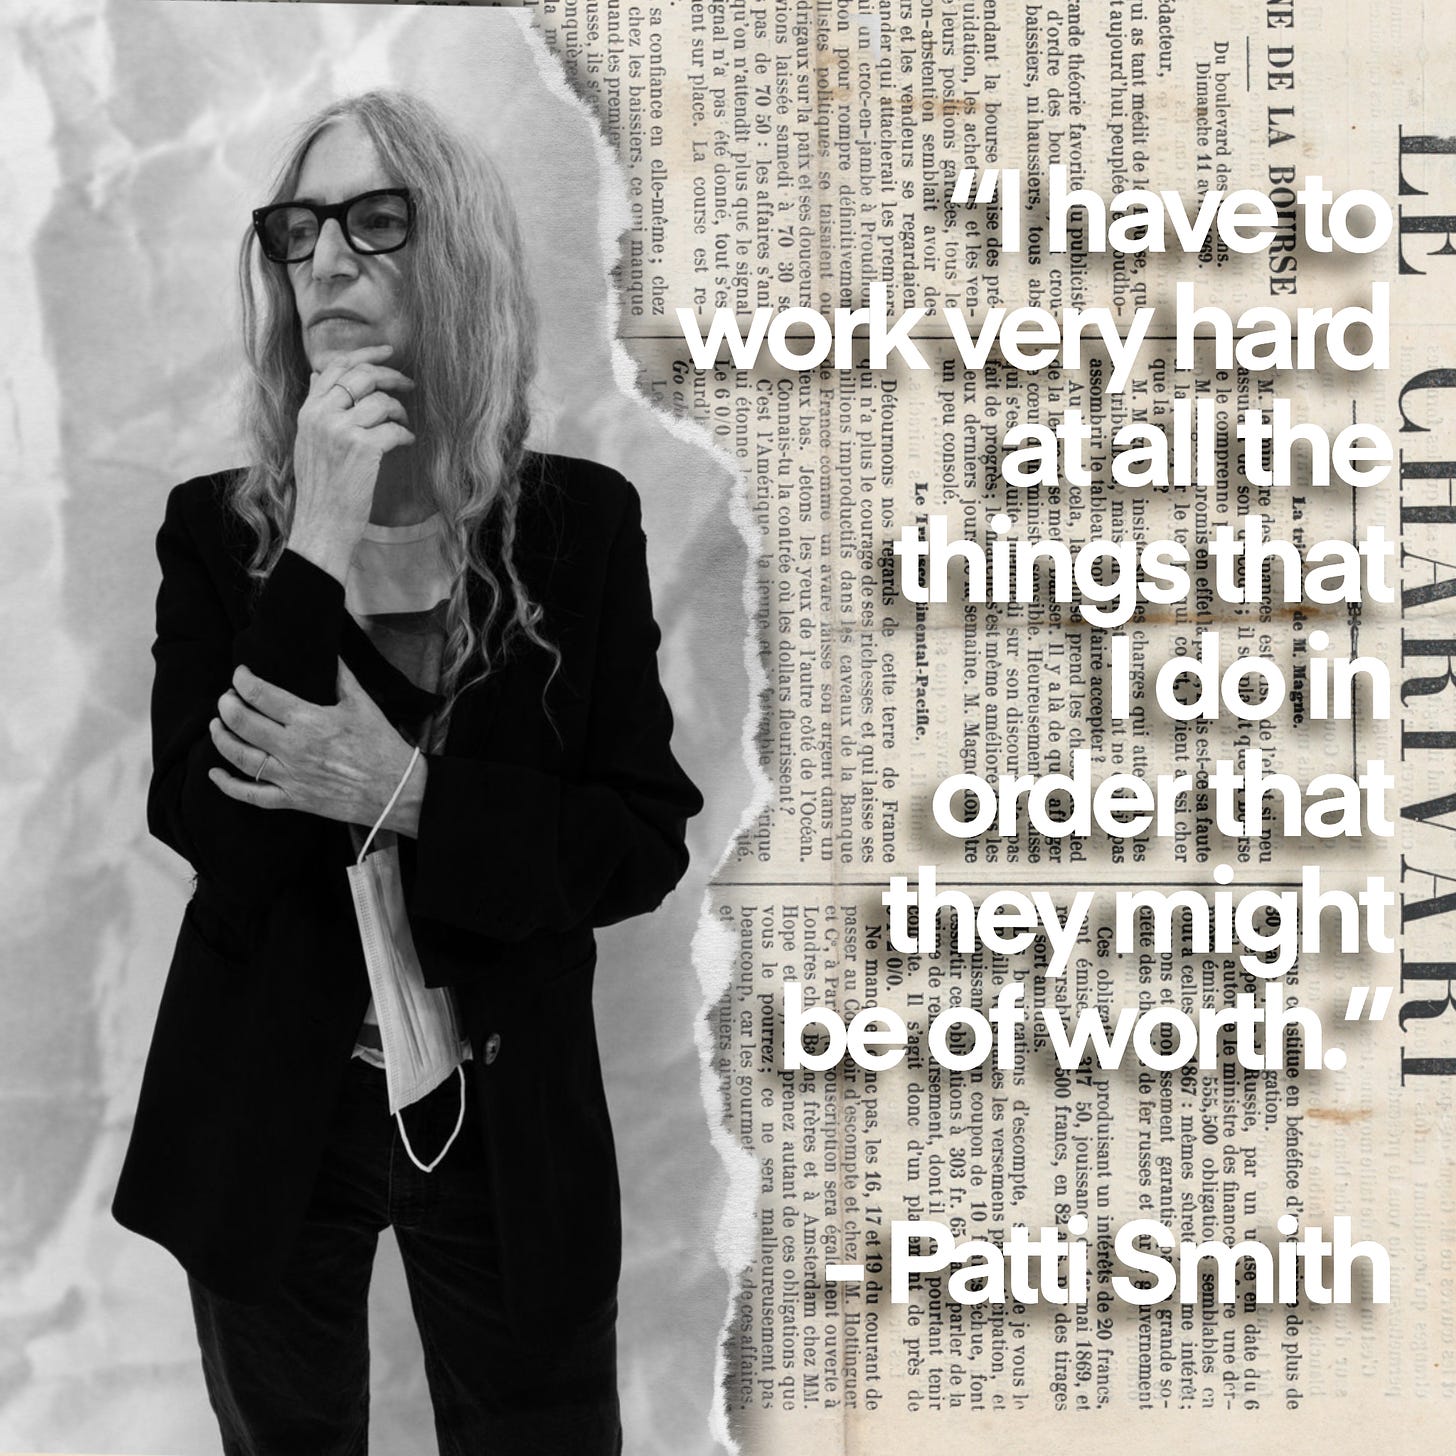 Photo of Patti Smith next to her quote that reads: "I have to work ver hard at all things that I do in order that the might be of worth"